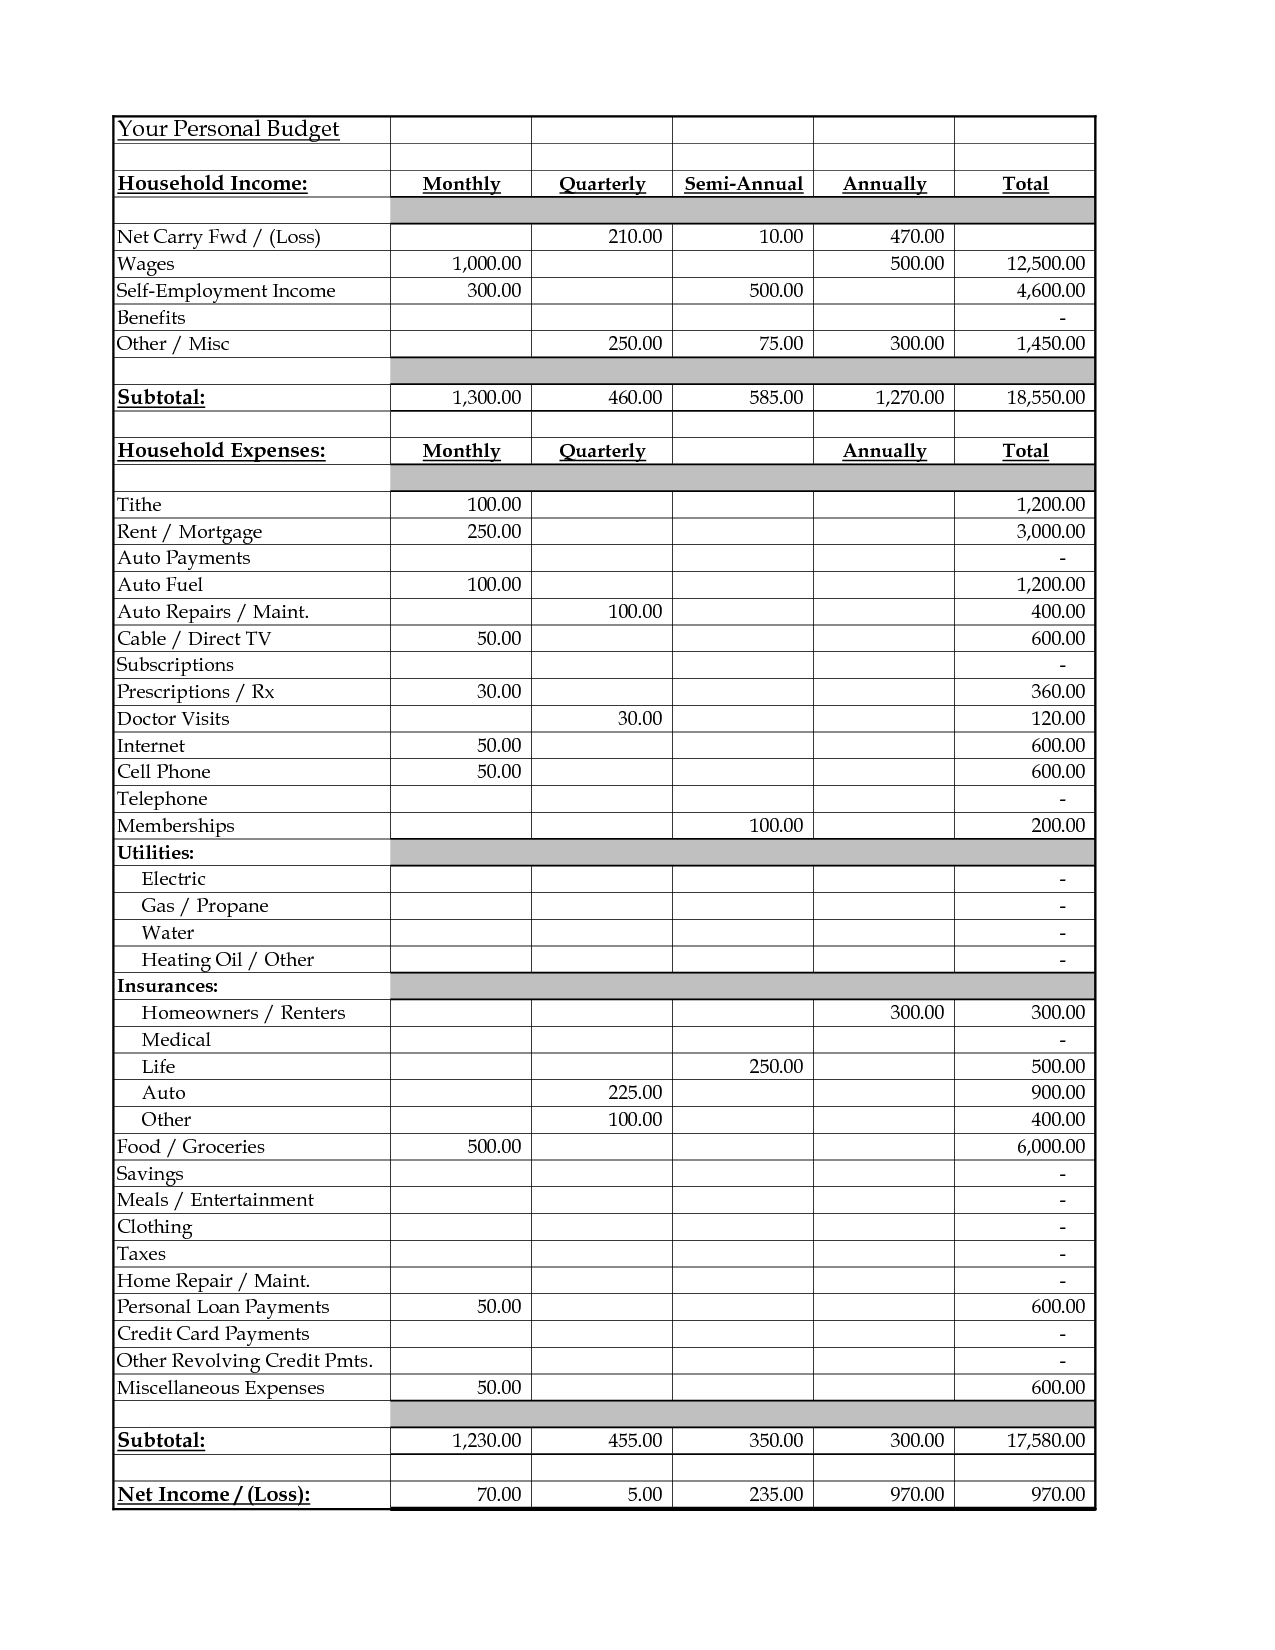 Department Budget Template Sample Personal Budget Template Mhzqby and